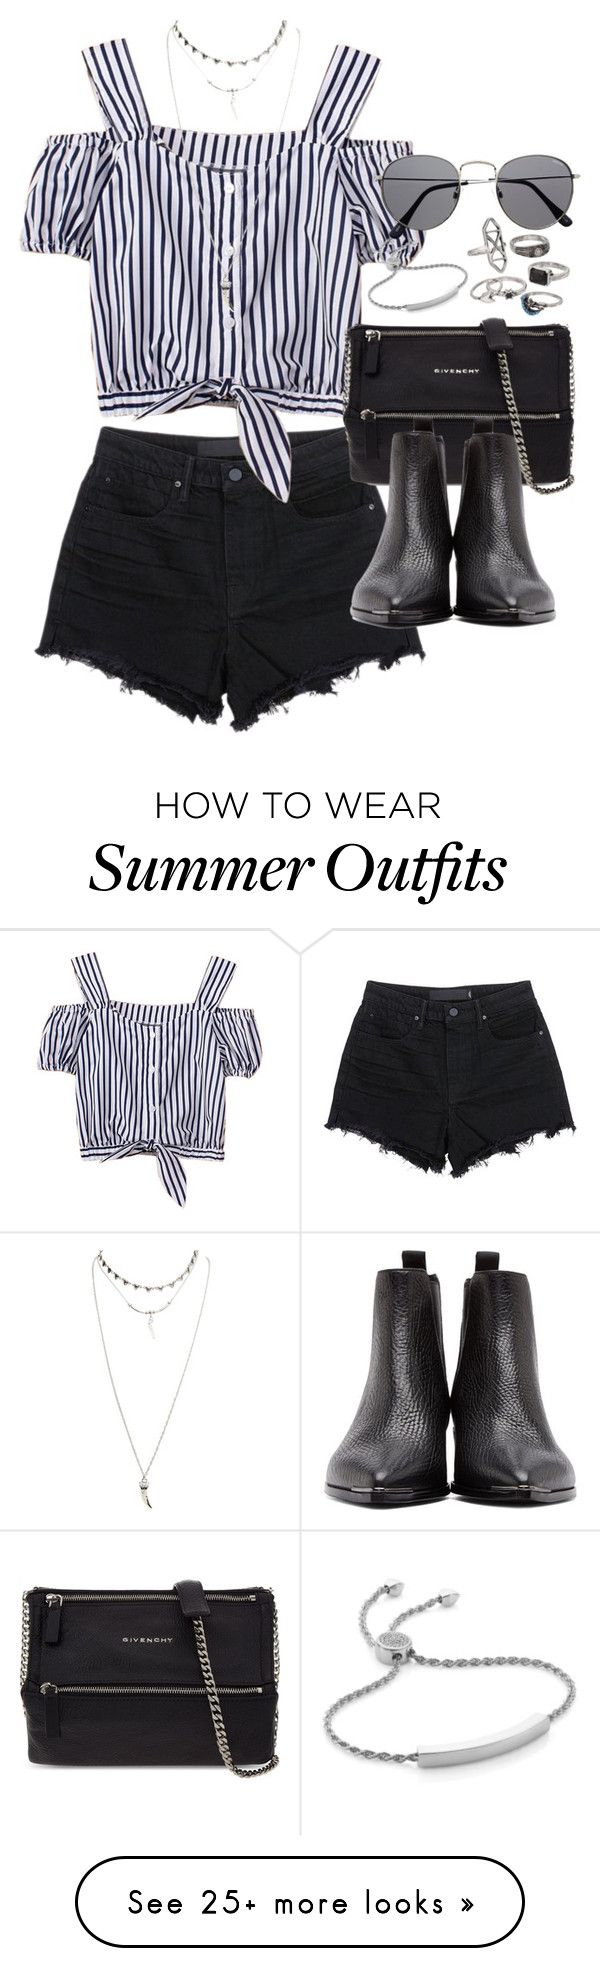 "Outfit for a summer festival" by ferned on Polyvore featuring Alexand...